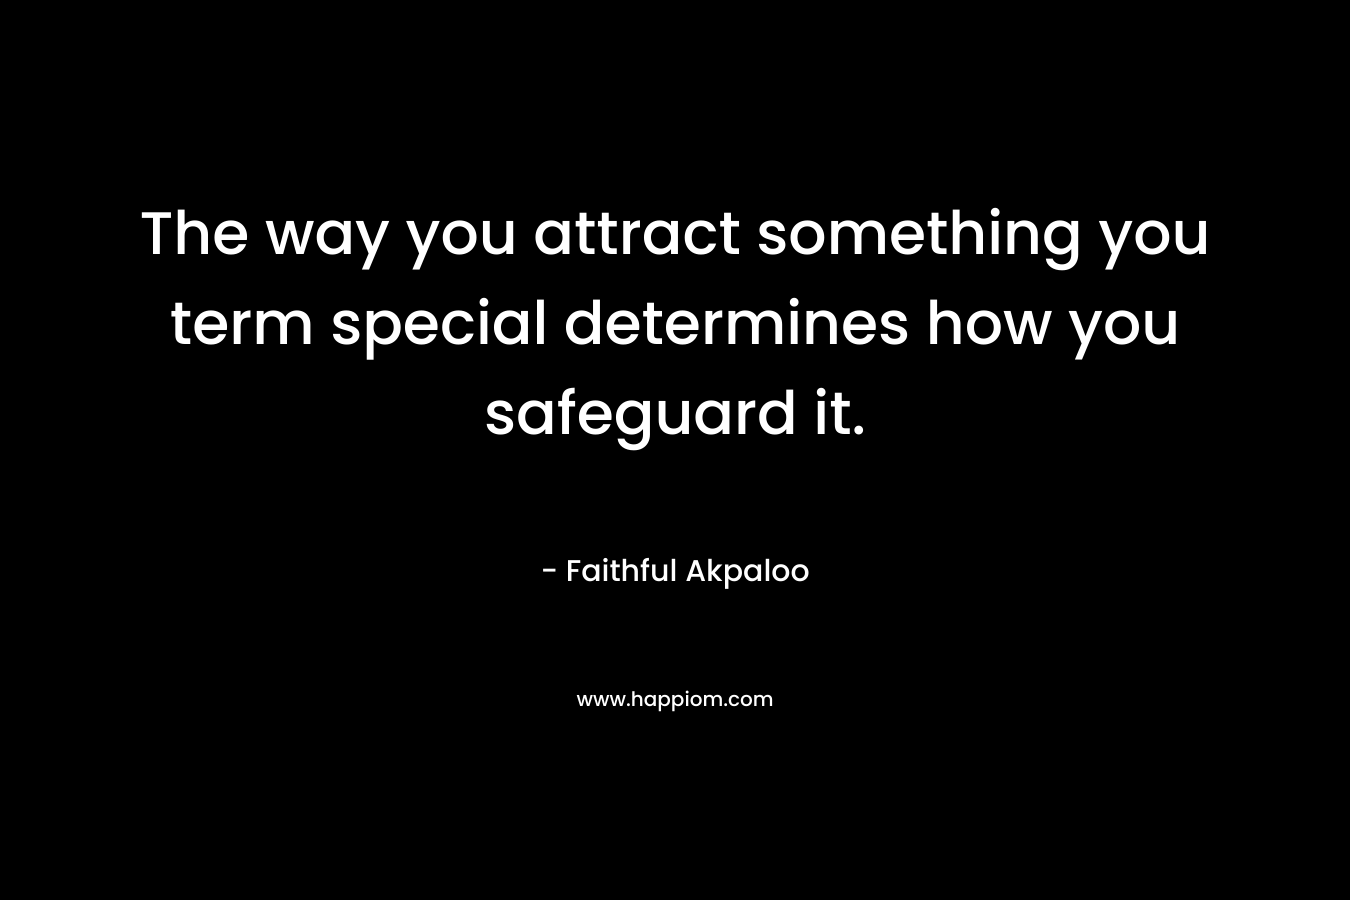 The way you attract something you term special determines how you safeguard it. – Faithful Akpaloo